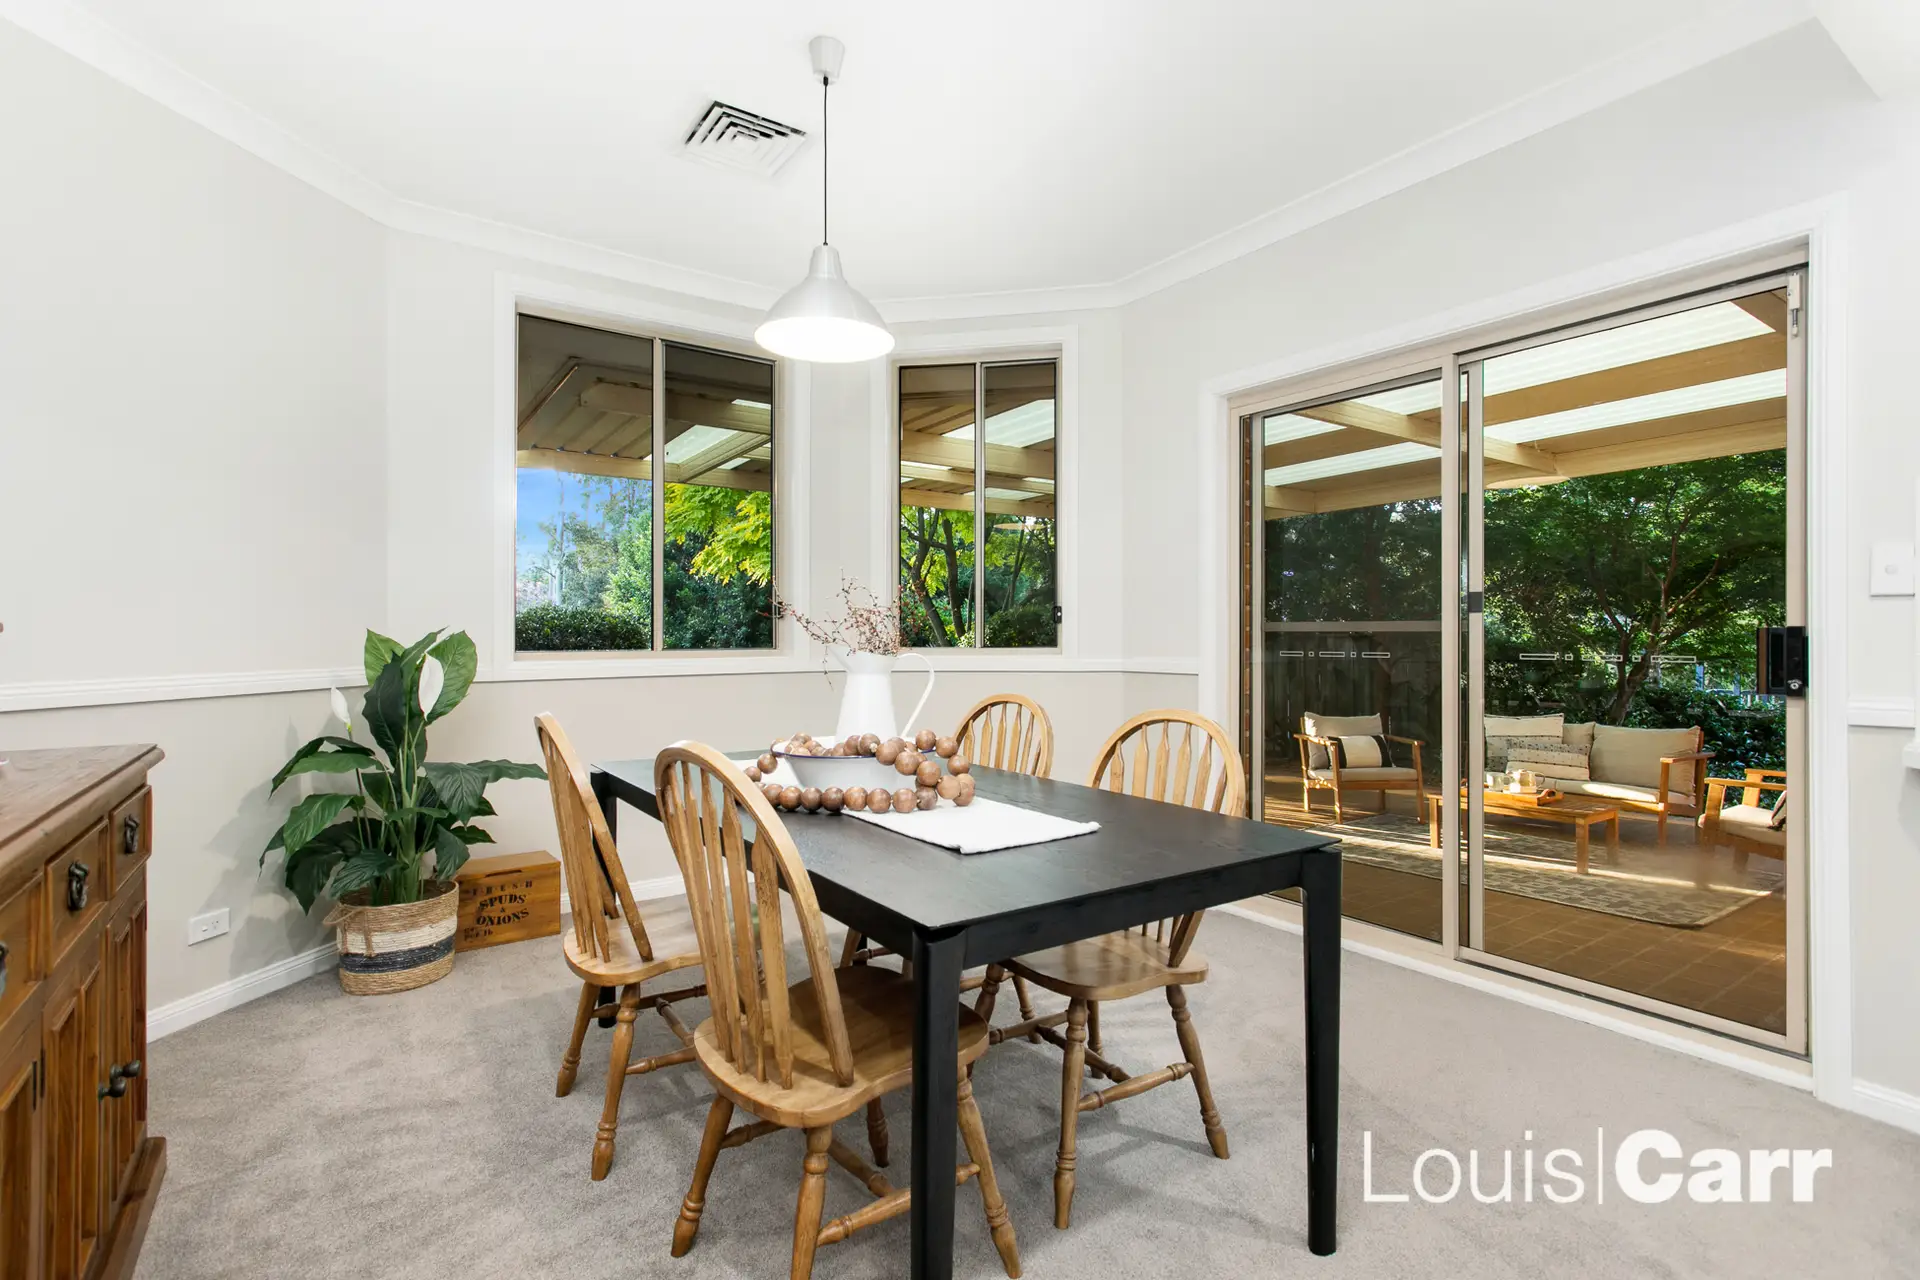 Photo #4: 5 Thornbill Way, West Pennant Hills - Sold by Louis Carr Real Estate